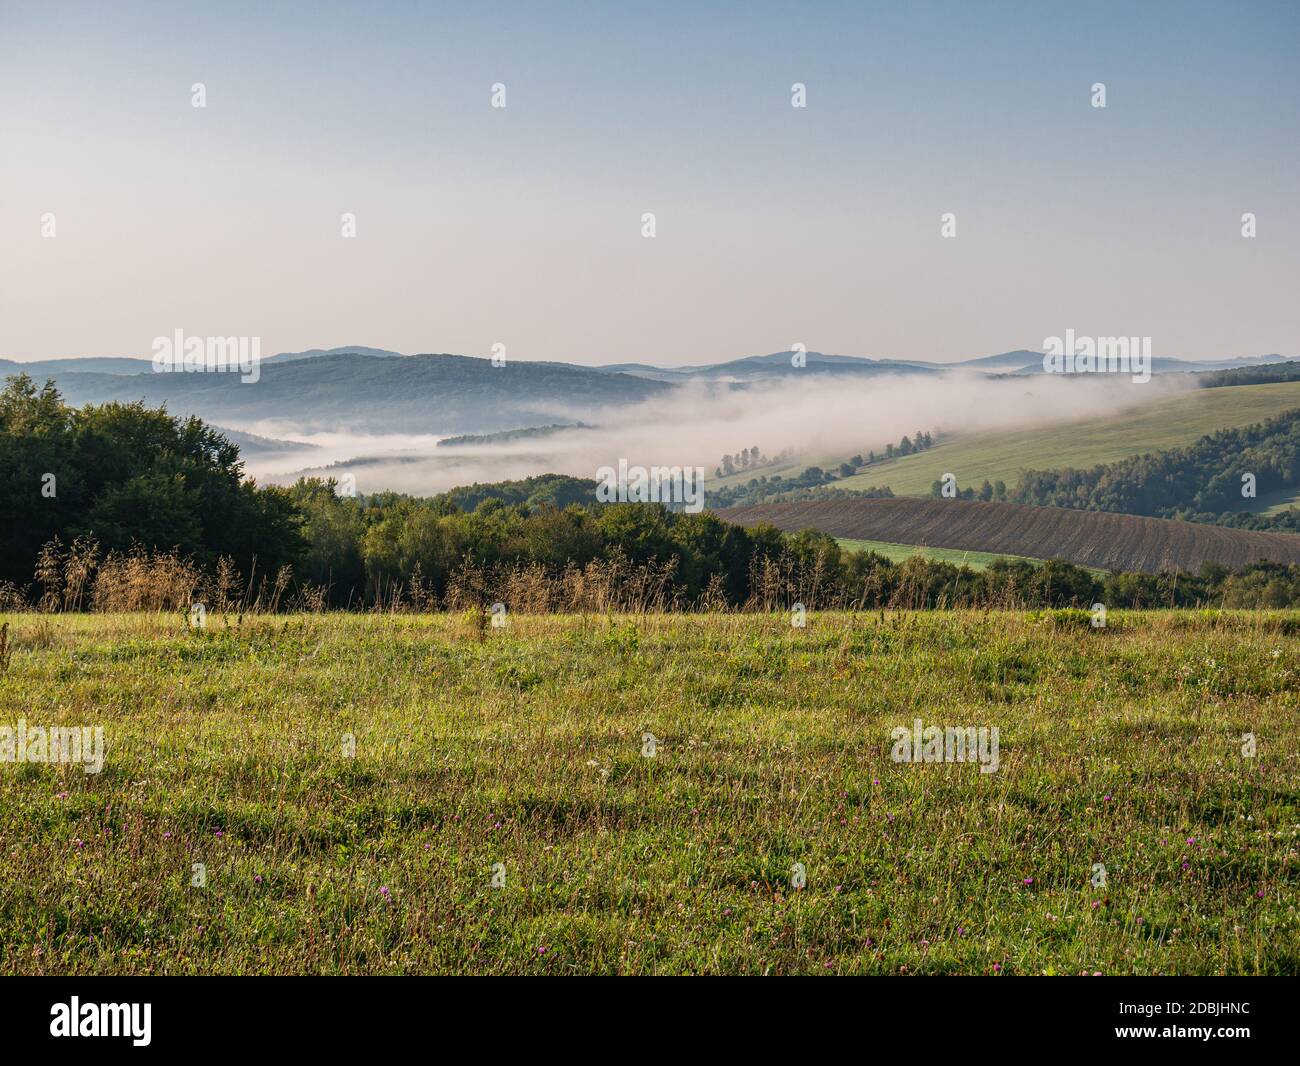 The morning mist hangs in the valleys of a hilly landscape Stock Photo